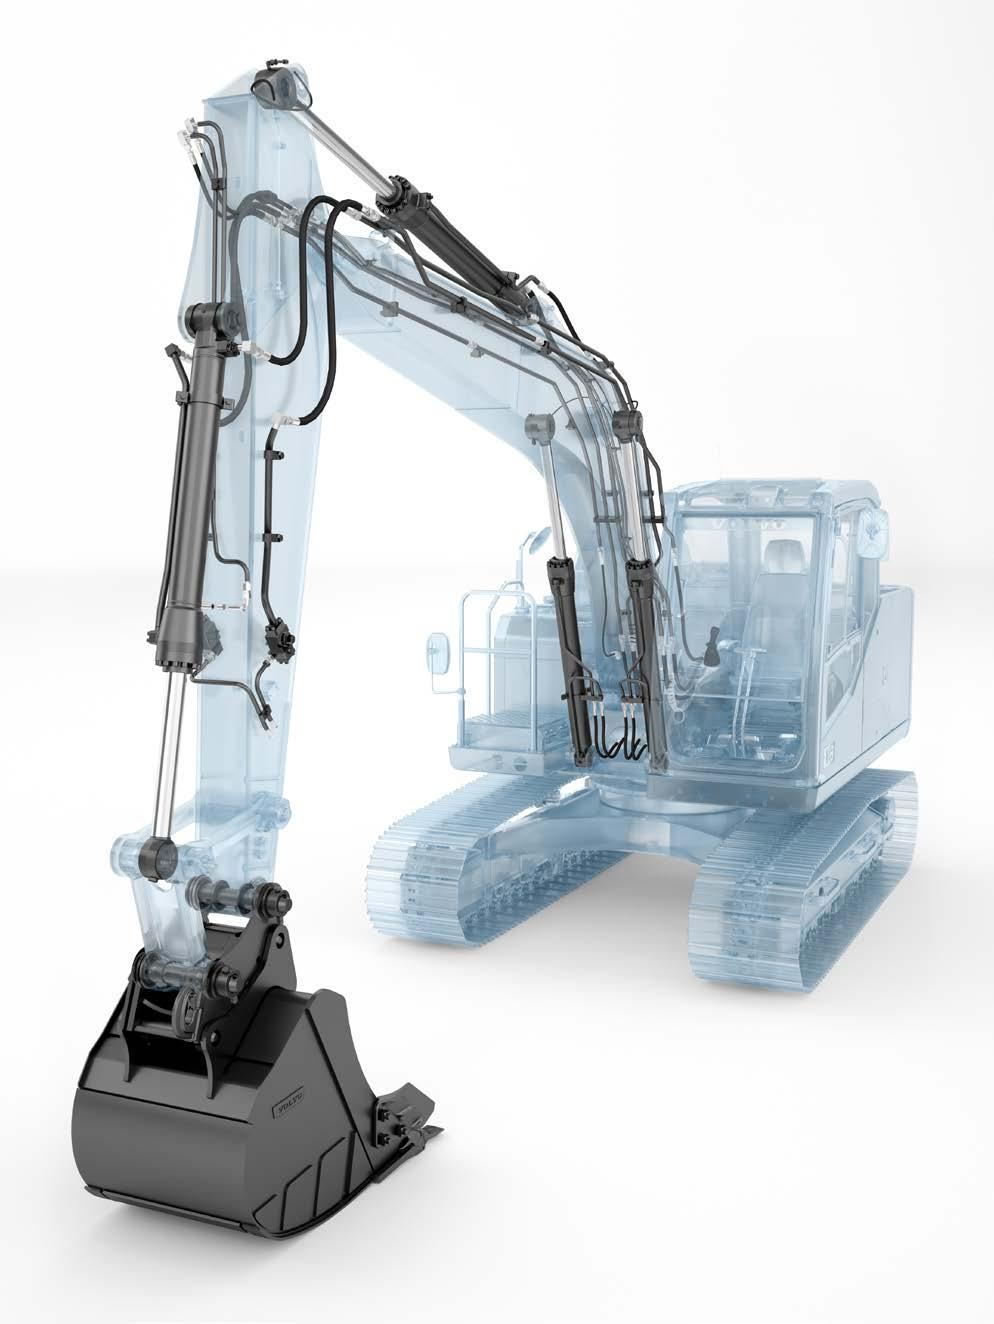 Ultimate tool carrier The Volvo excavator can be outfitted with a wide variety of auxiliary circuits from the factory, from breaker and shear piping (X1) to rotator piping (X3).